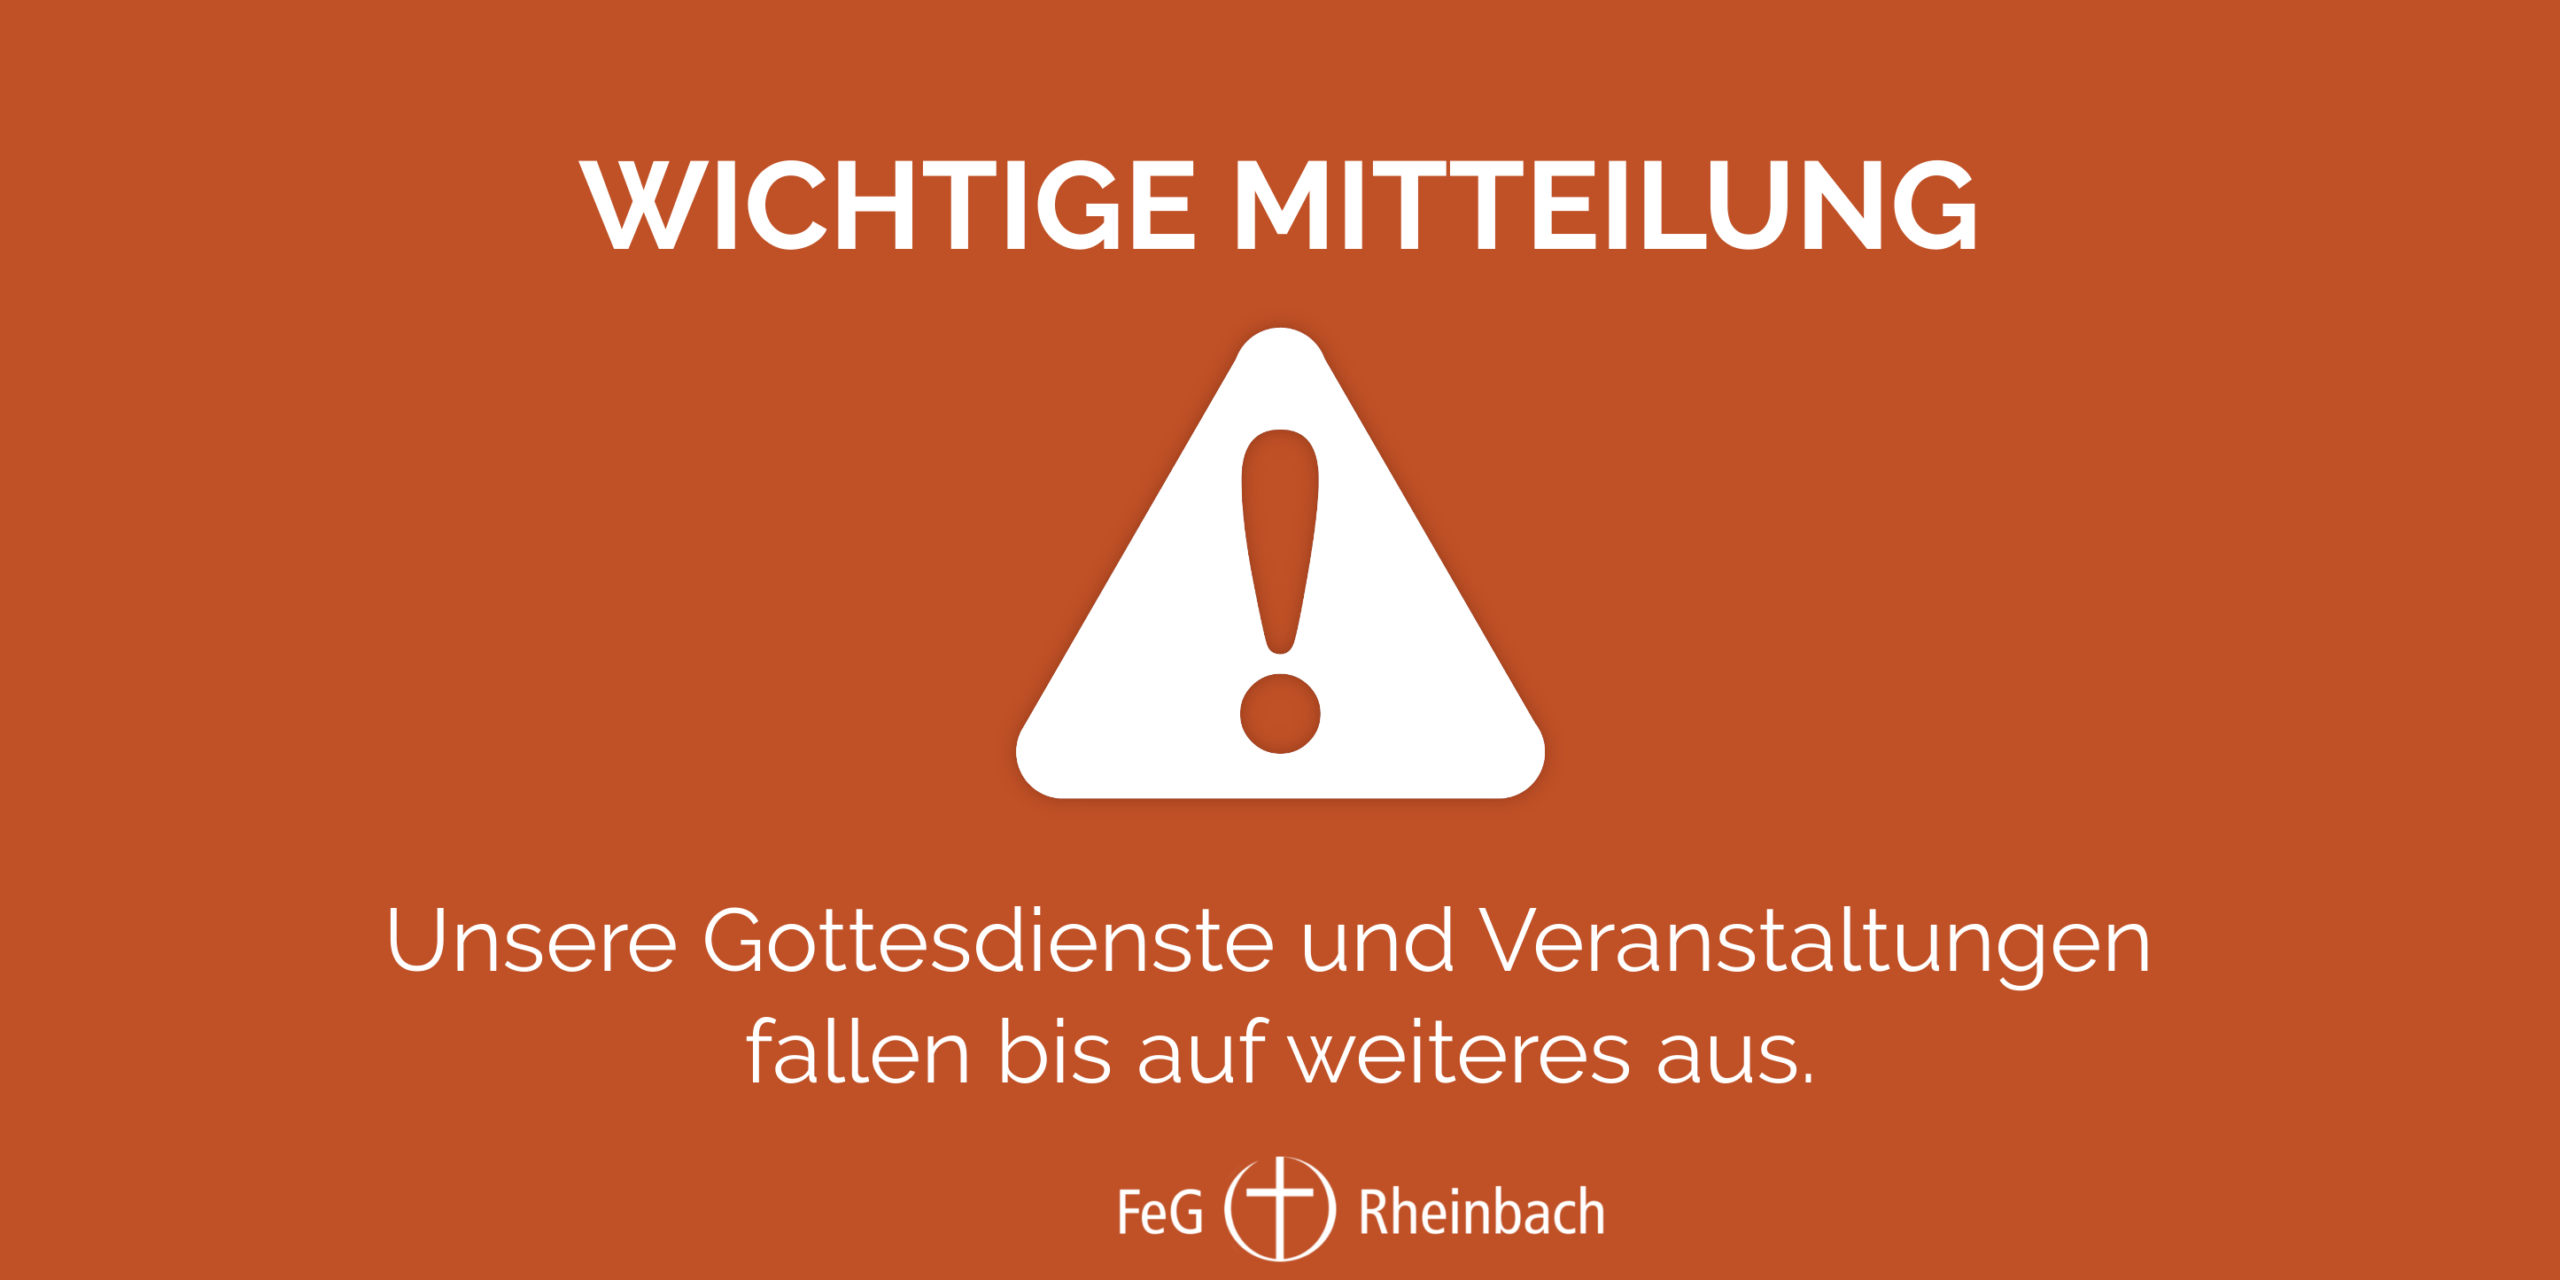 You are currently viewing Wichtige Mitteilung